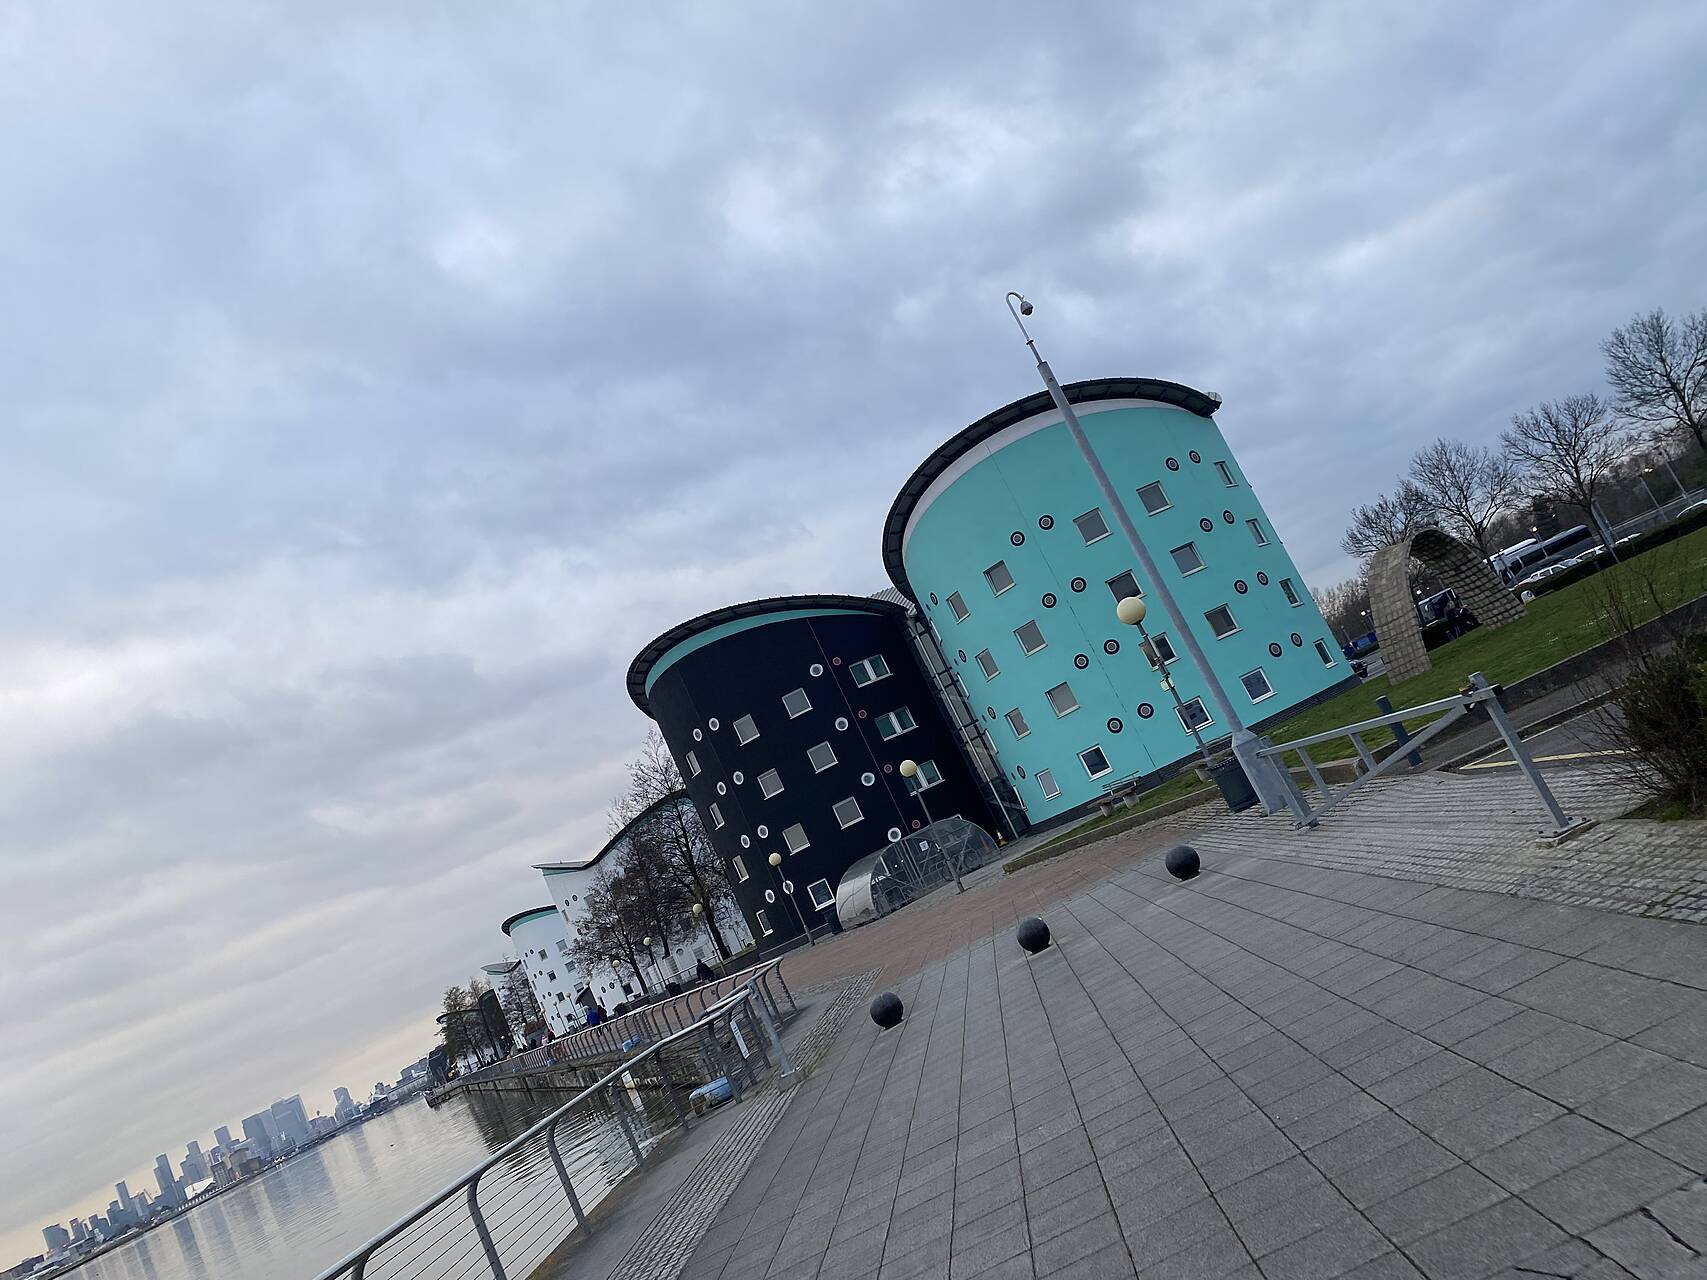 Taken from a moving bike, cylindrical residential buildings with colourful walls on a dockside with the London skyline in the background.jpeg